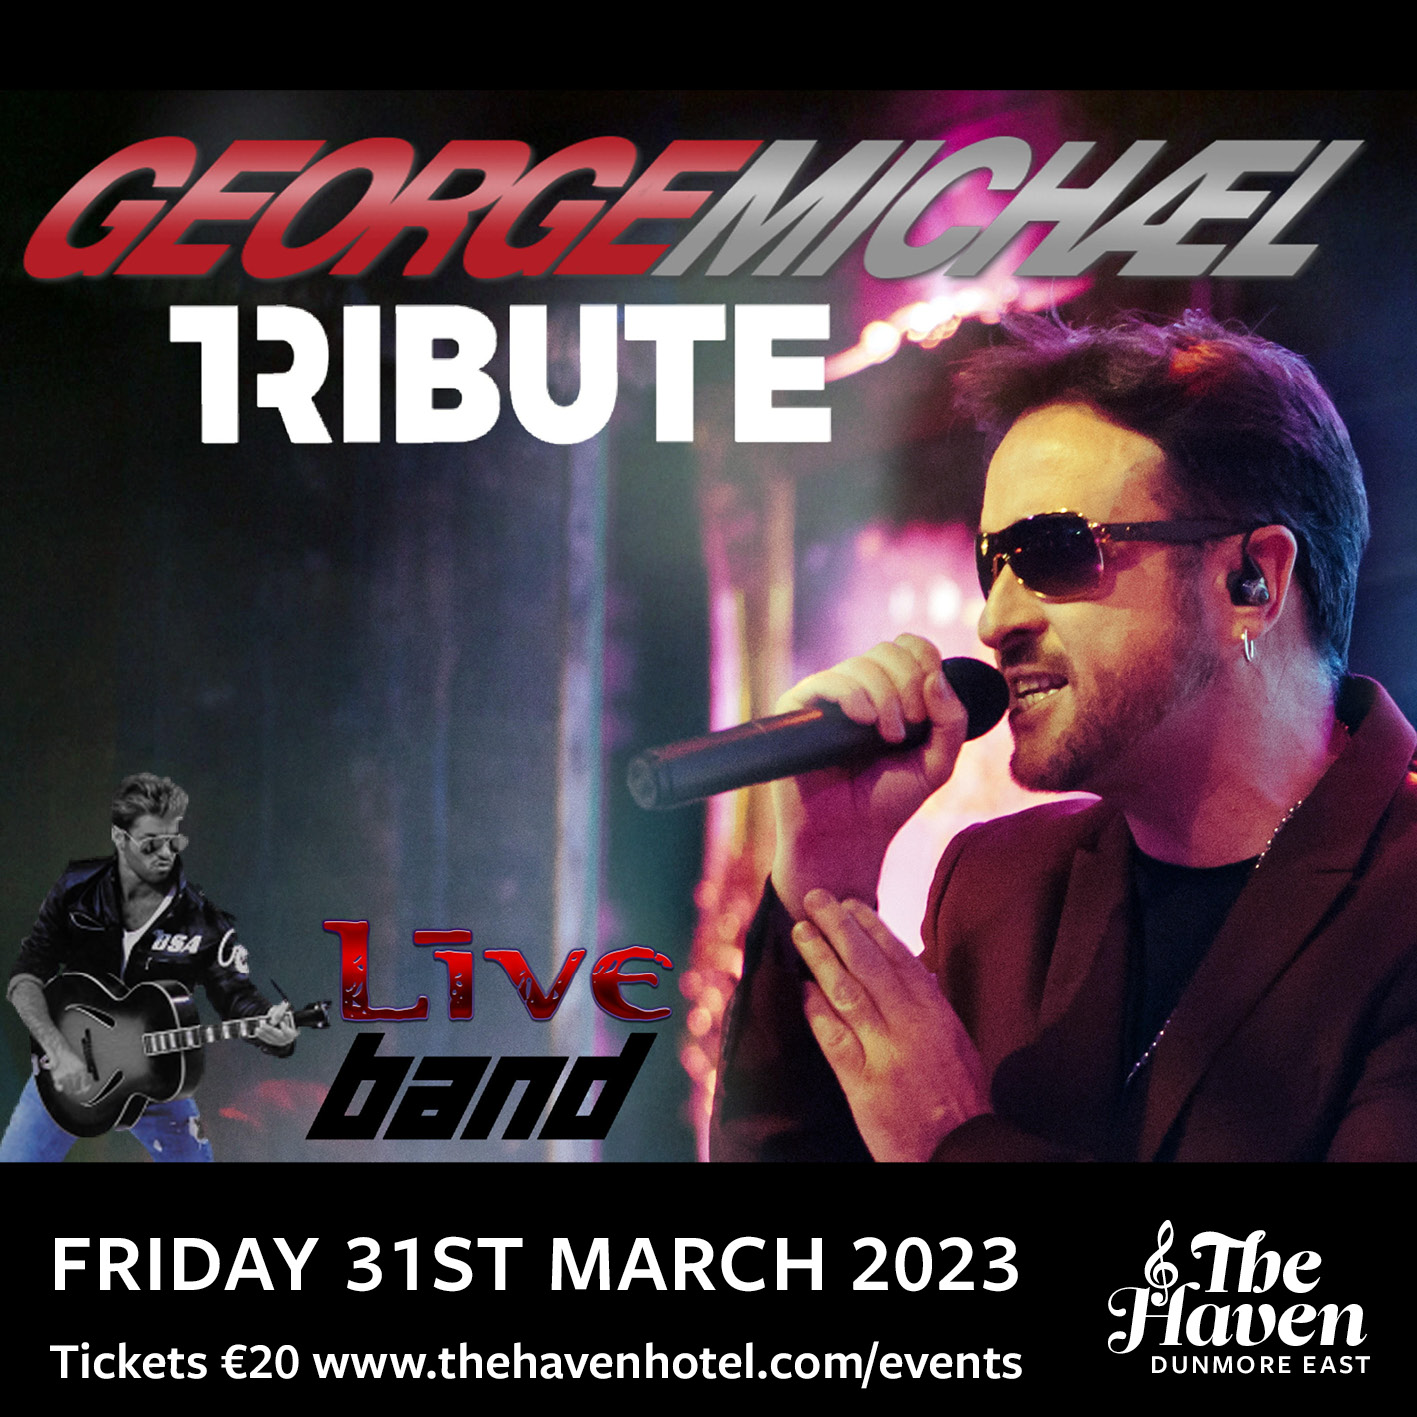 George Michael Tribute at The Haven Hotel, Dunmore East